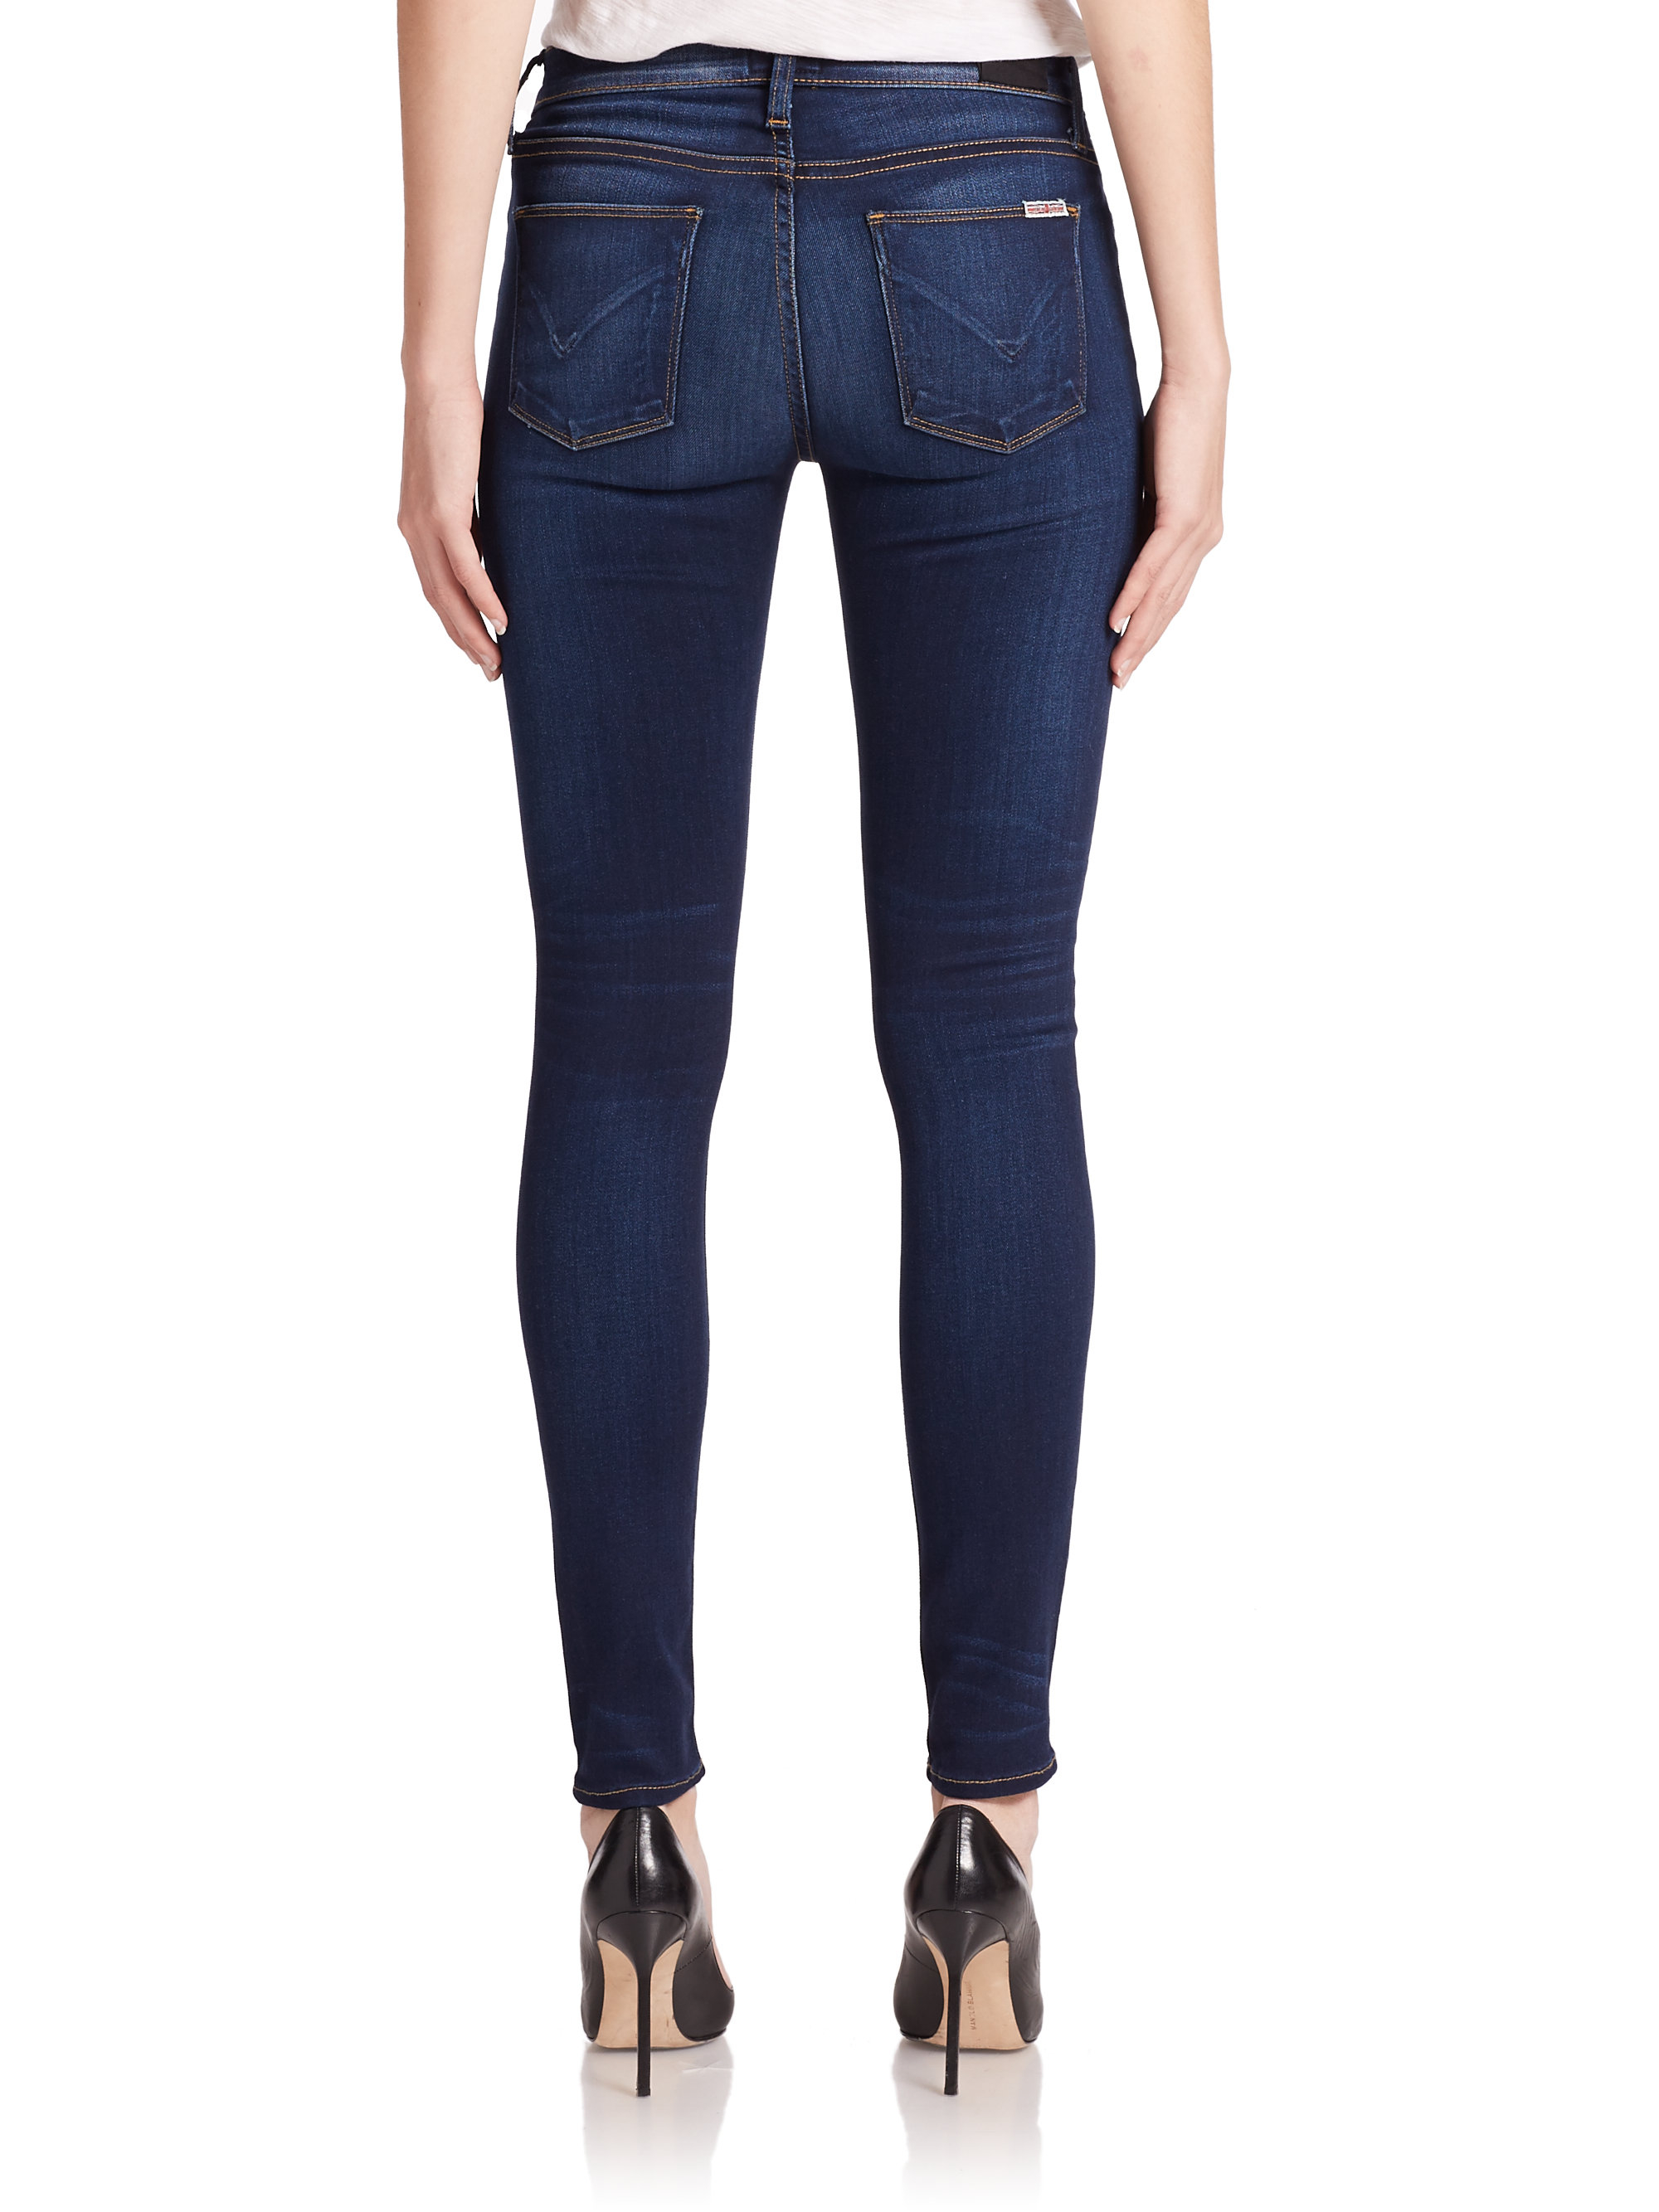 Hudson jeans Elysian Nico Mid-rise Super Skinny Jeans in Blue | Lyst